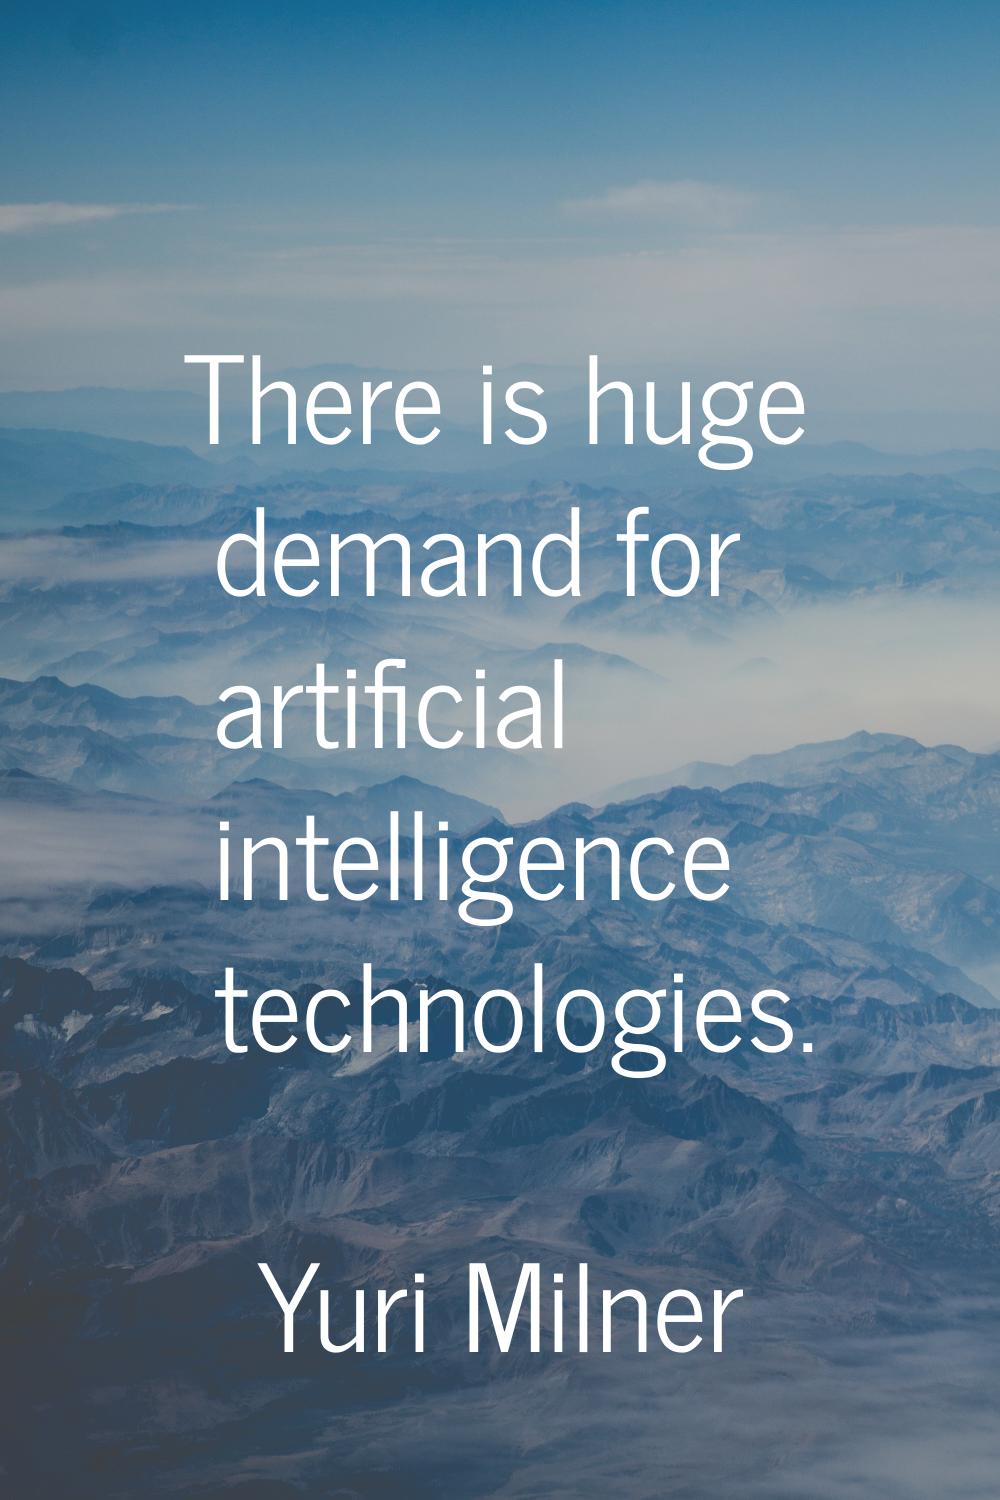 There is huge demand for artificial intelligence technologies.